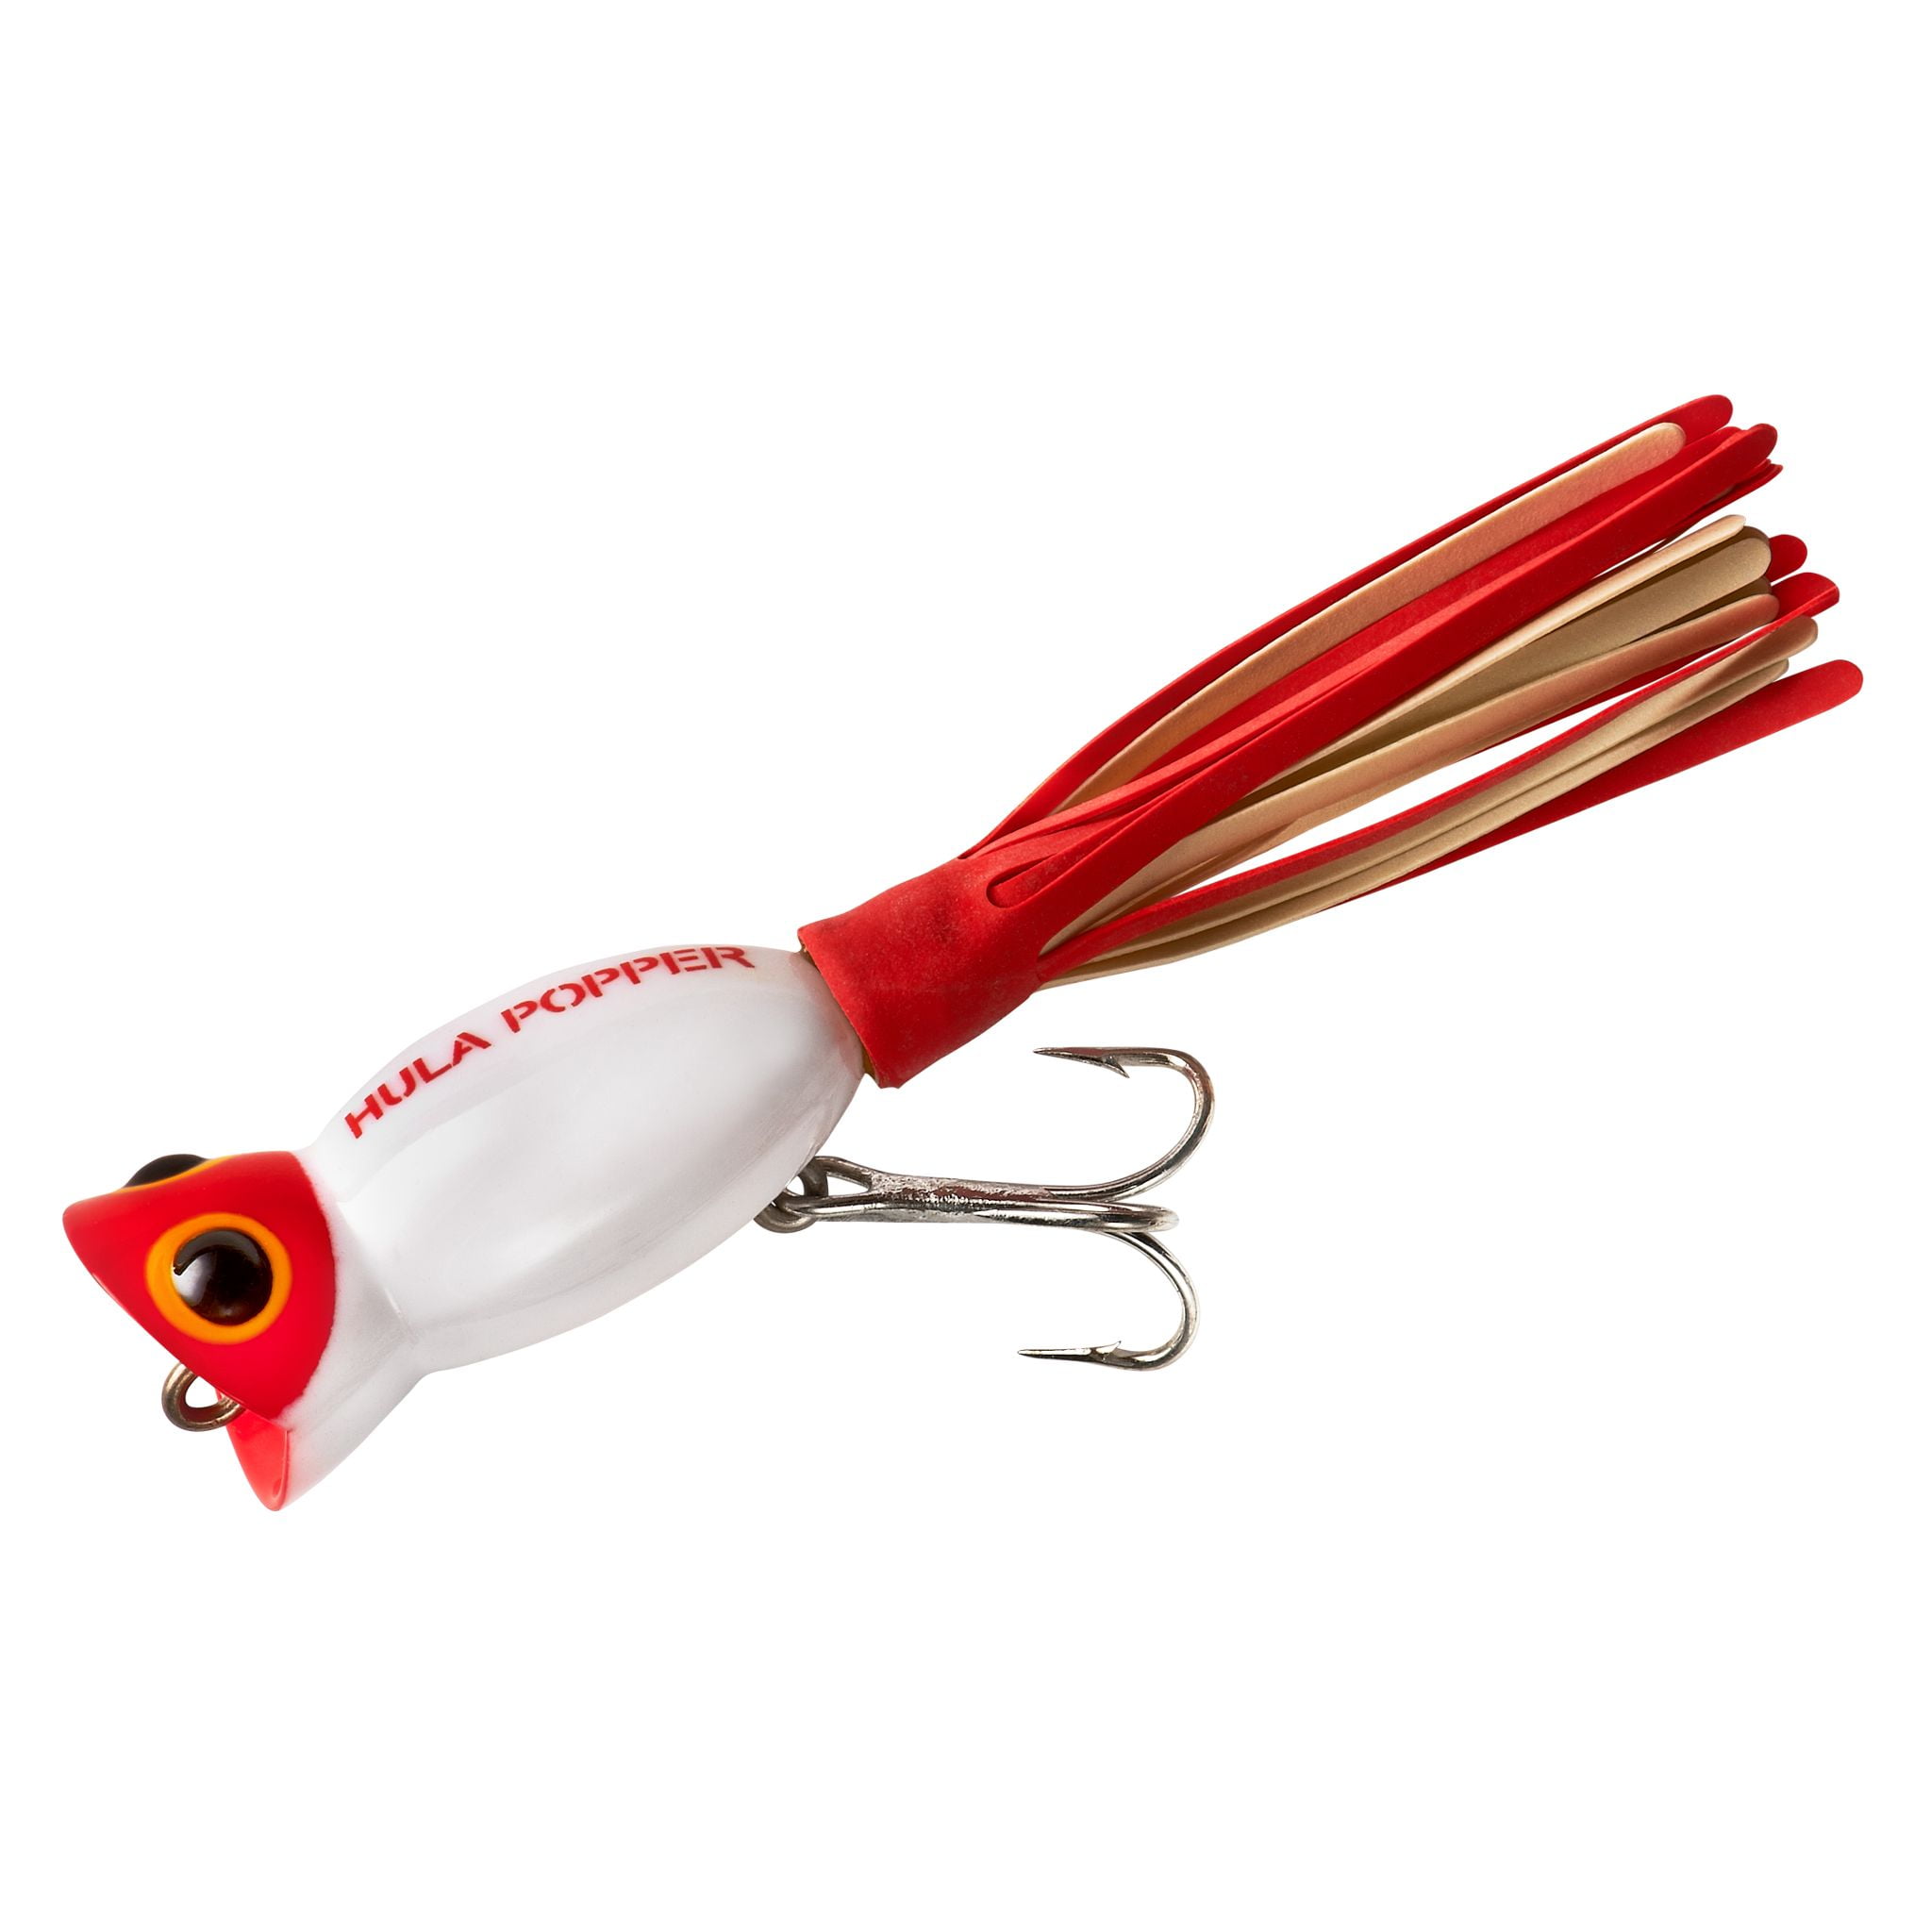  SUPVOX 3pcs Bait Belt Set Fishing Lure Quick Clips  Wear-Resistant Lures Clip Clips for Fishing Lures Wear- Resistant Red Worm  Clip Professional Red Worm Clip Major Abs Fishing Supplies 